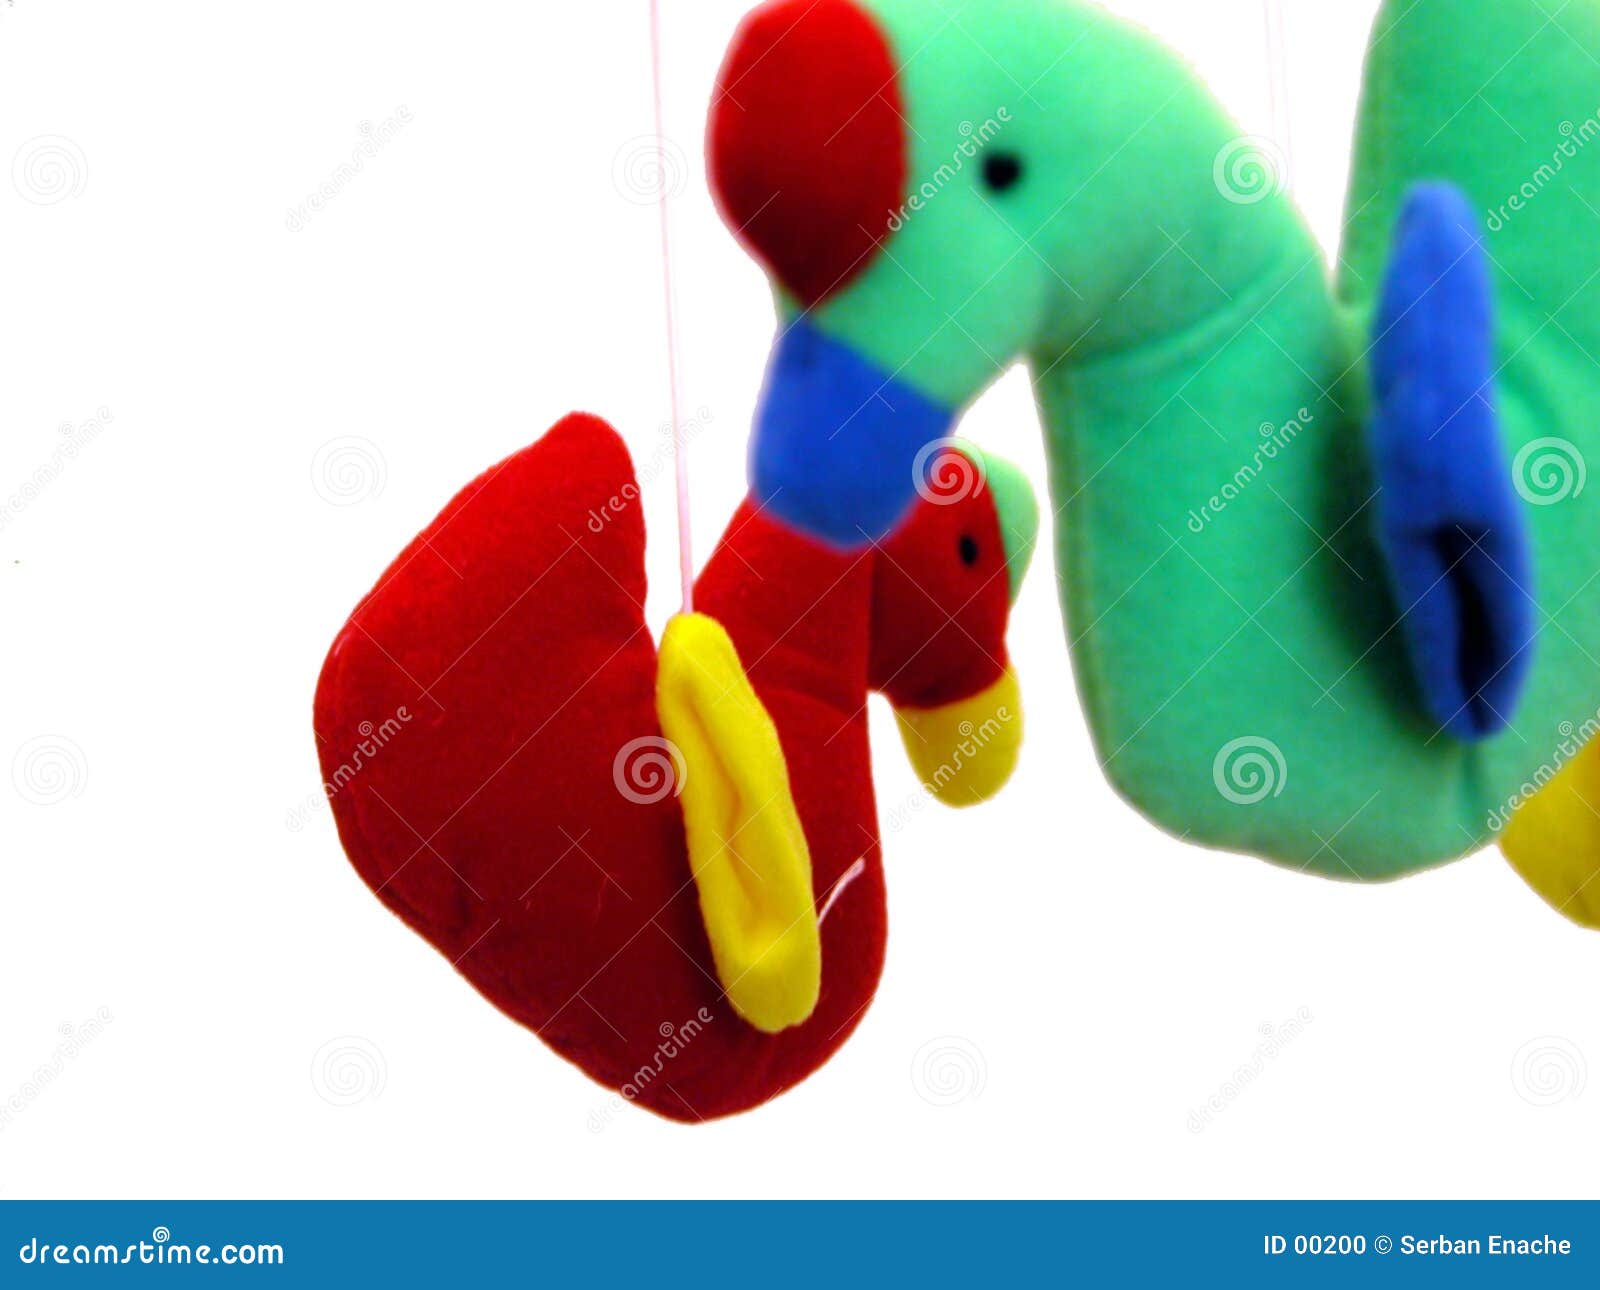 Kids toys stock photo. Image of close, chicken, background - 200